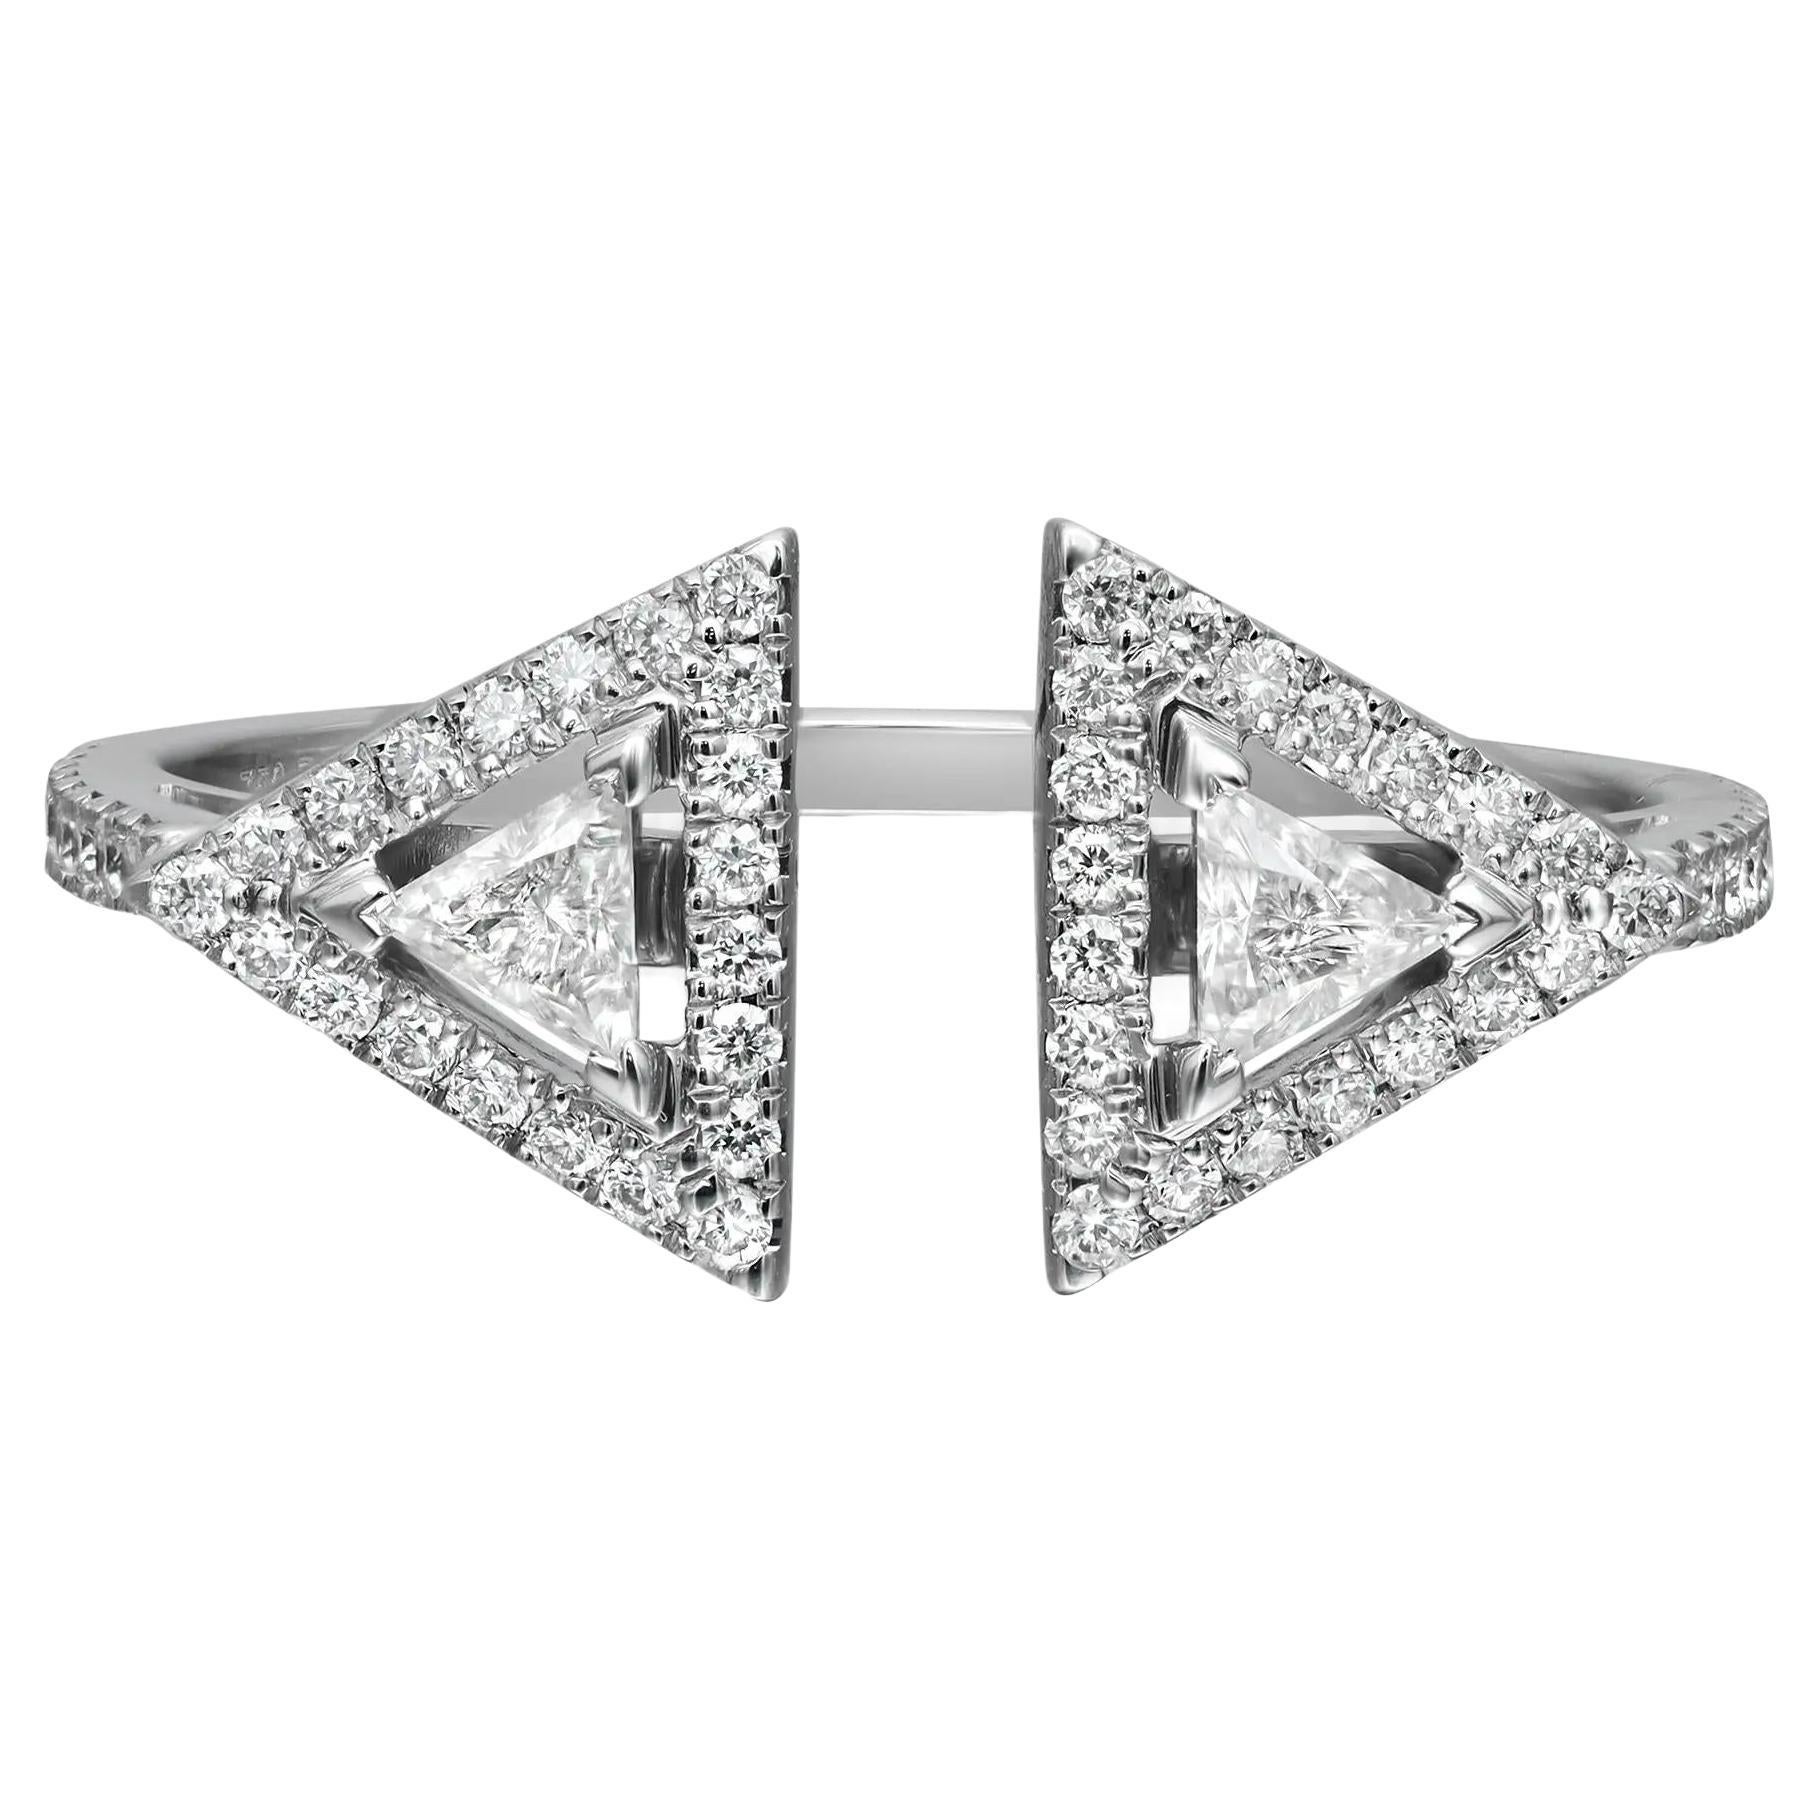 Messika 0.34Cttw Thea Diamond Ring 18K White Gold Size 53 US 6.5 For Sale